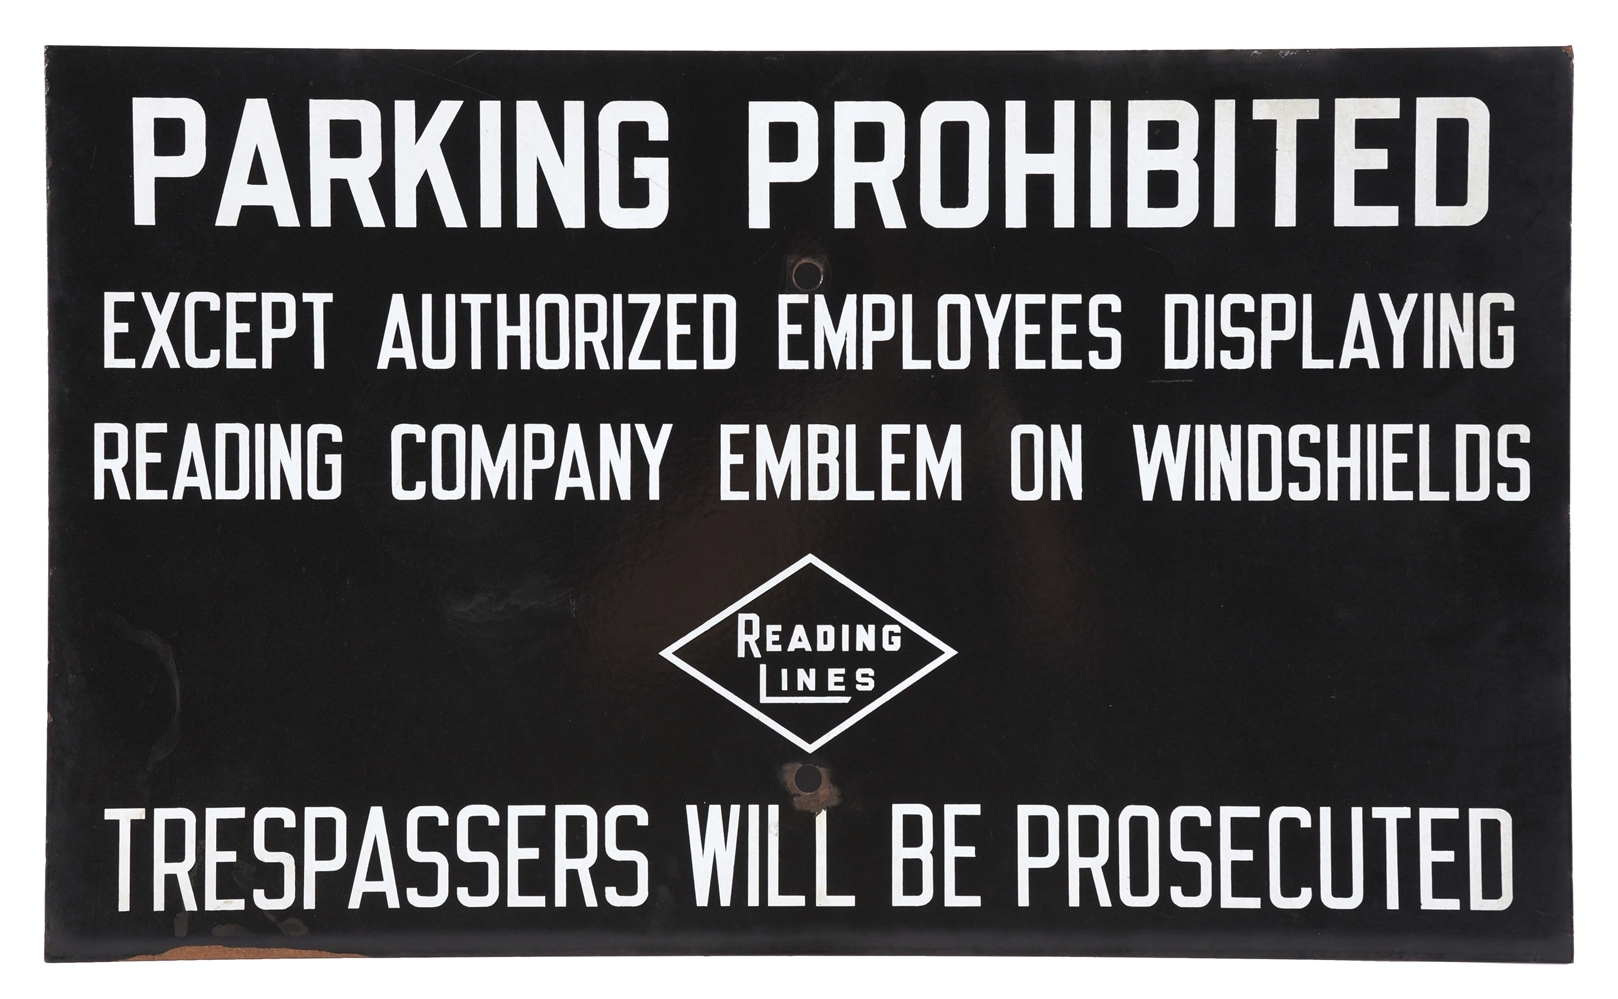 "READING LINES PARKING PROHIBITED" SINGLE SIDED PORCELAIN SIGN.